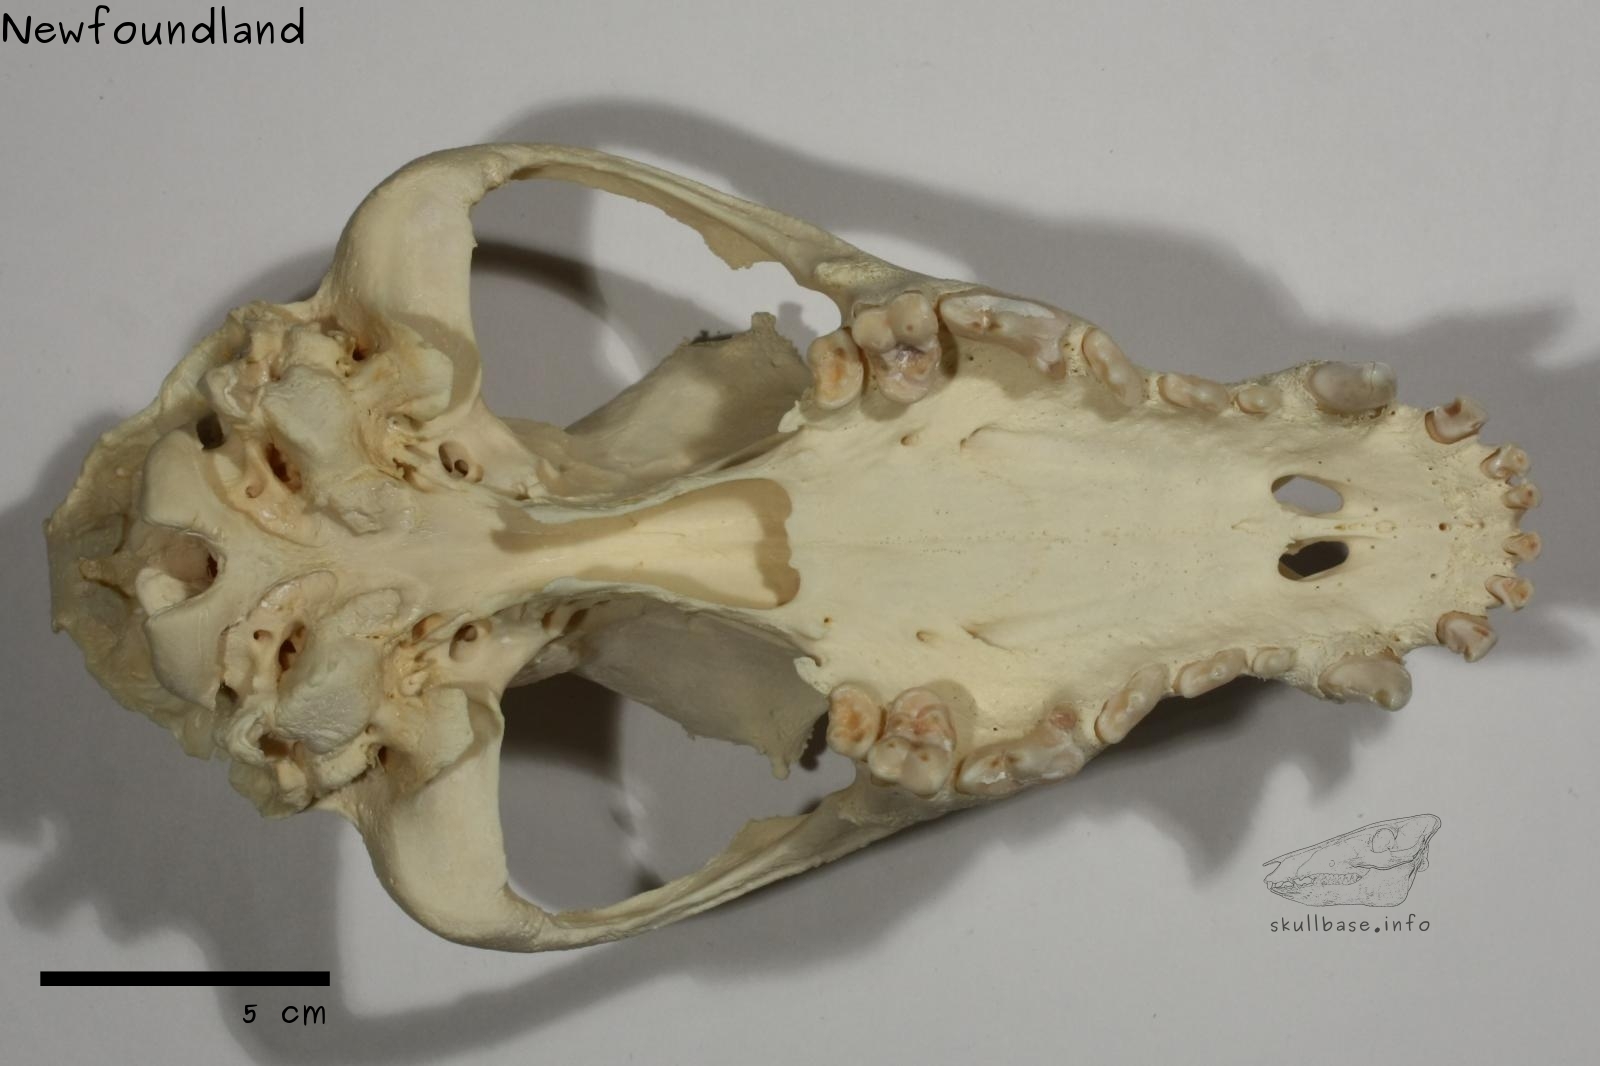 Newfoundland (Canis lupus familiaris) skull ventral view